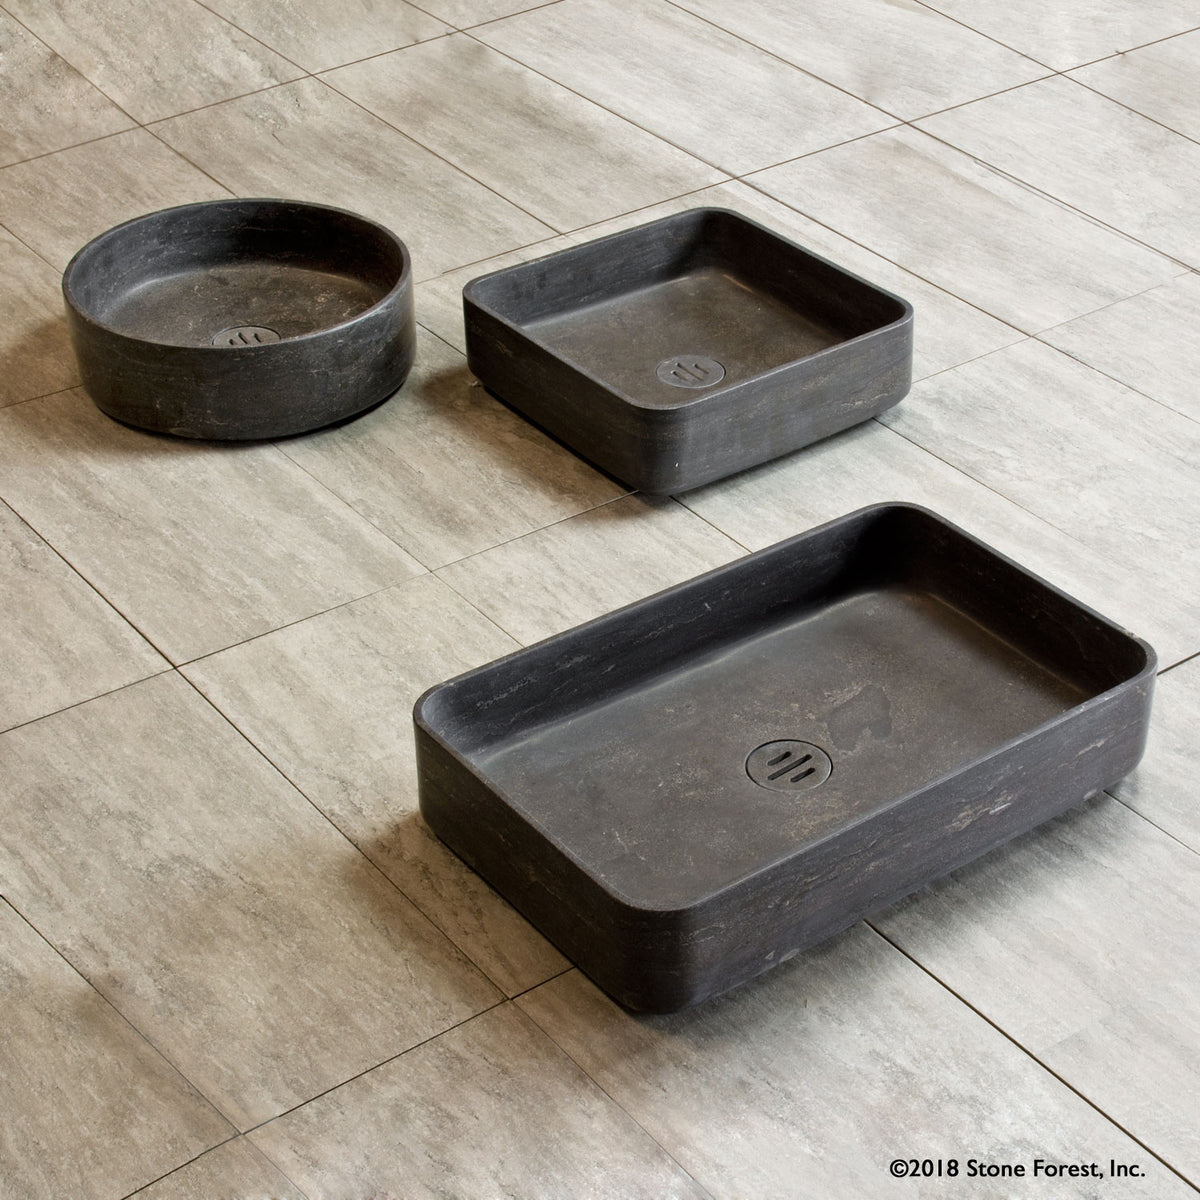 Contour Vessel Sinks in antique gray limestone. Shaped as square, round or rectangular sinks  image 3 of 6